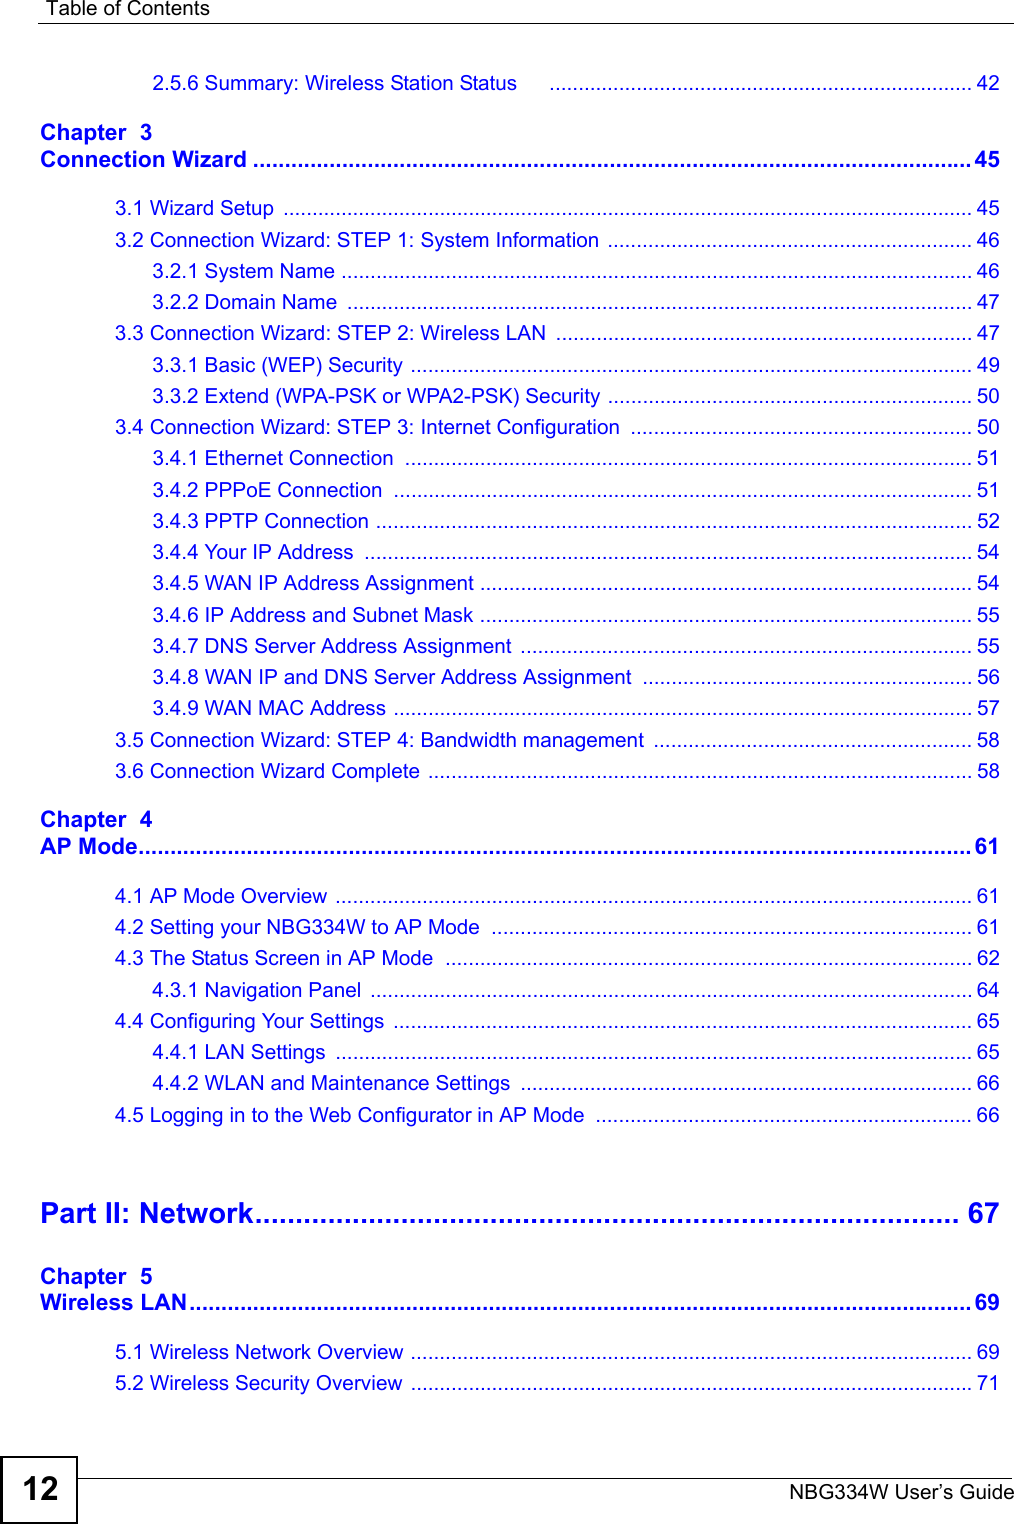 Table of ContentsNBG334W User’s Guide122.5.6 Summary: Wireless Station Status      ......................................................................... 42Chapter  3Connection Wizard ................................................................................................................. 453.1 Wizard Setup  ....................................................................................................................... 453.2 Connection Wizard: STEP 1: System Information ............................................................... 463.2.1 System Name ............................................................................................................. 463.2.2 Domain Name  ............................................................................................................ 473.3 Connection Wizard: STEP 2: Wireless LAN  ........................................................................ 473.3.1 Basic (WEP) Security ................................................................................................. 493.3.2 Extend (WPA-PSK or WPA2-PSK) Security ............................................................... 503.4 Connection Wizard: STEP 3: Internet Configuration  ........................................................... 503.4.1 Ethernet Connection  .................................................................................................. 513.4.2 PPPoE Connection  .................................................................................................... 513.4.3 PPTP Connection ....................................................................................................... 523.4.4 Your IP Address  ......................................................................................................... 543.4.5 WAN IP Address Assignment ..................................................................................... 543.4.6 IP Address and Subnet Mask ..................................................................................... 553.4.7 DNS Server Address Assignment  .............................................................................. 553.4.8 WAN IP and DNS Server Address Assignment ......................................................... 563.4.9 WAN MAC Address .................................................................................................... 573.5 Connection Wizard: STEP 4: Bandwidth management  ....................................................... 583.6 Connection Wizard Complete .............................................................................................. 58Chapter  4AP Mode................................................................................................................................... 614.1 AP Mode Overview  .............................................................................................................. 614.2 Setting your NBG334W to AP Mode  ................................................................................... 614.3 The Status Screen in AP Mode  ........................................................................................... 624.3.1 Navigation Panel  ........................................................................................................ 644.4 Configuring Your Settings  .................................................................................................... 654.4.1 LAN Settings  .............................................................................................................. 654.4.2 WLAN and Maintenance Settings  .............................................................................. 664.5 Logging in to the Web Configurator in AP Mode  ................................................................. 66Part II: Network....................................................................................... 67Chapter  5Wireless LAN........................................................................................................................... 695.1 Wireless Network Overview ................................................................................................. 695.2 Wireless Security Overview .................................................................................................71